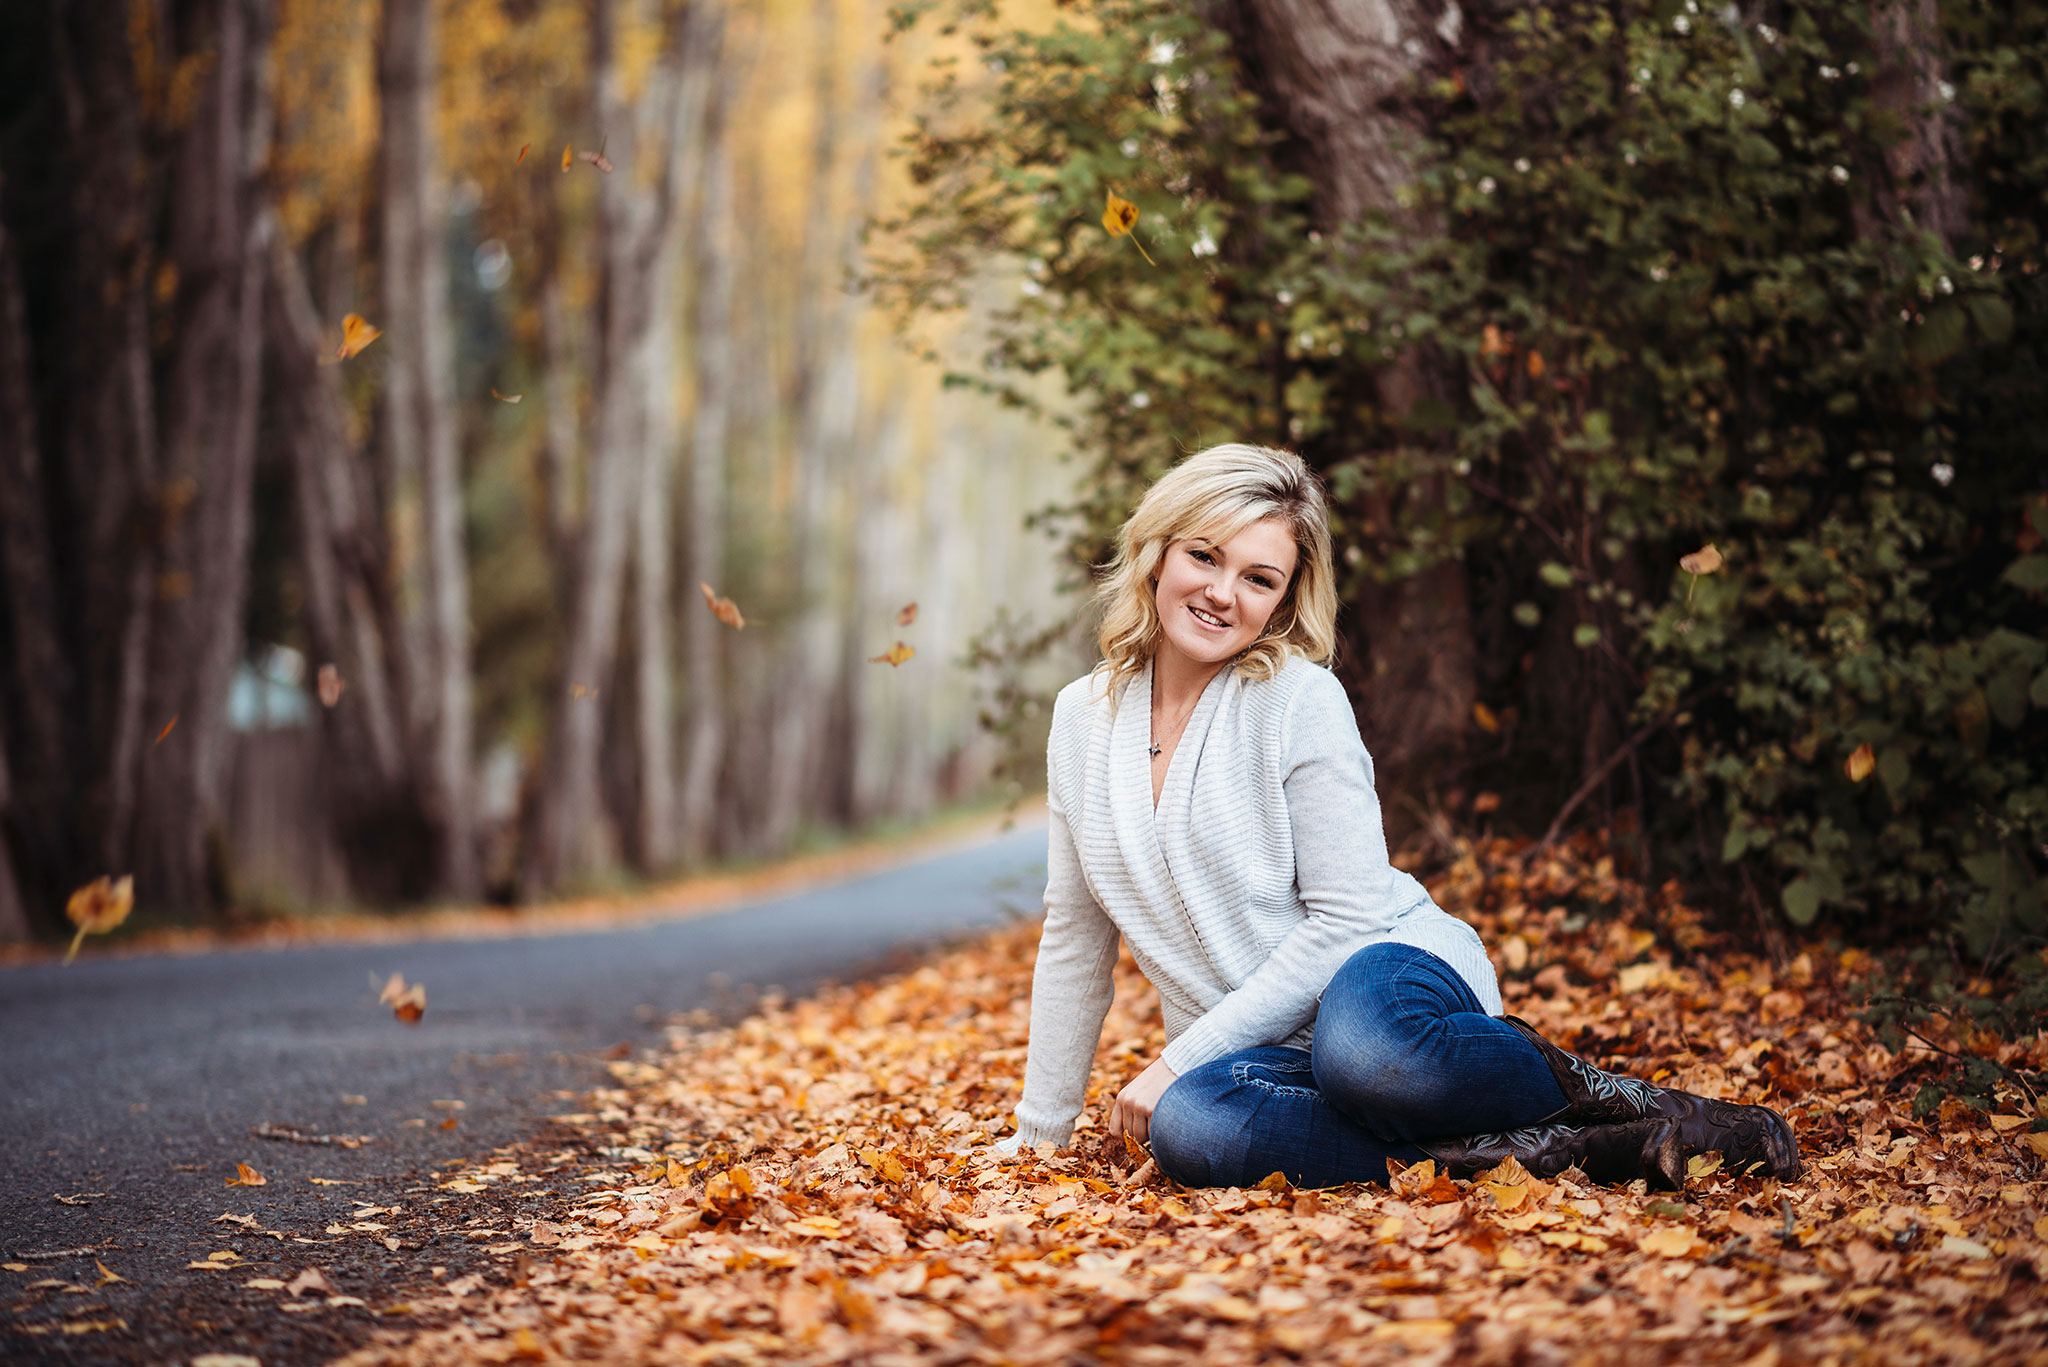 Fall outdoor portrait photography in Metchosin near Victoria, BC.